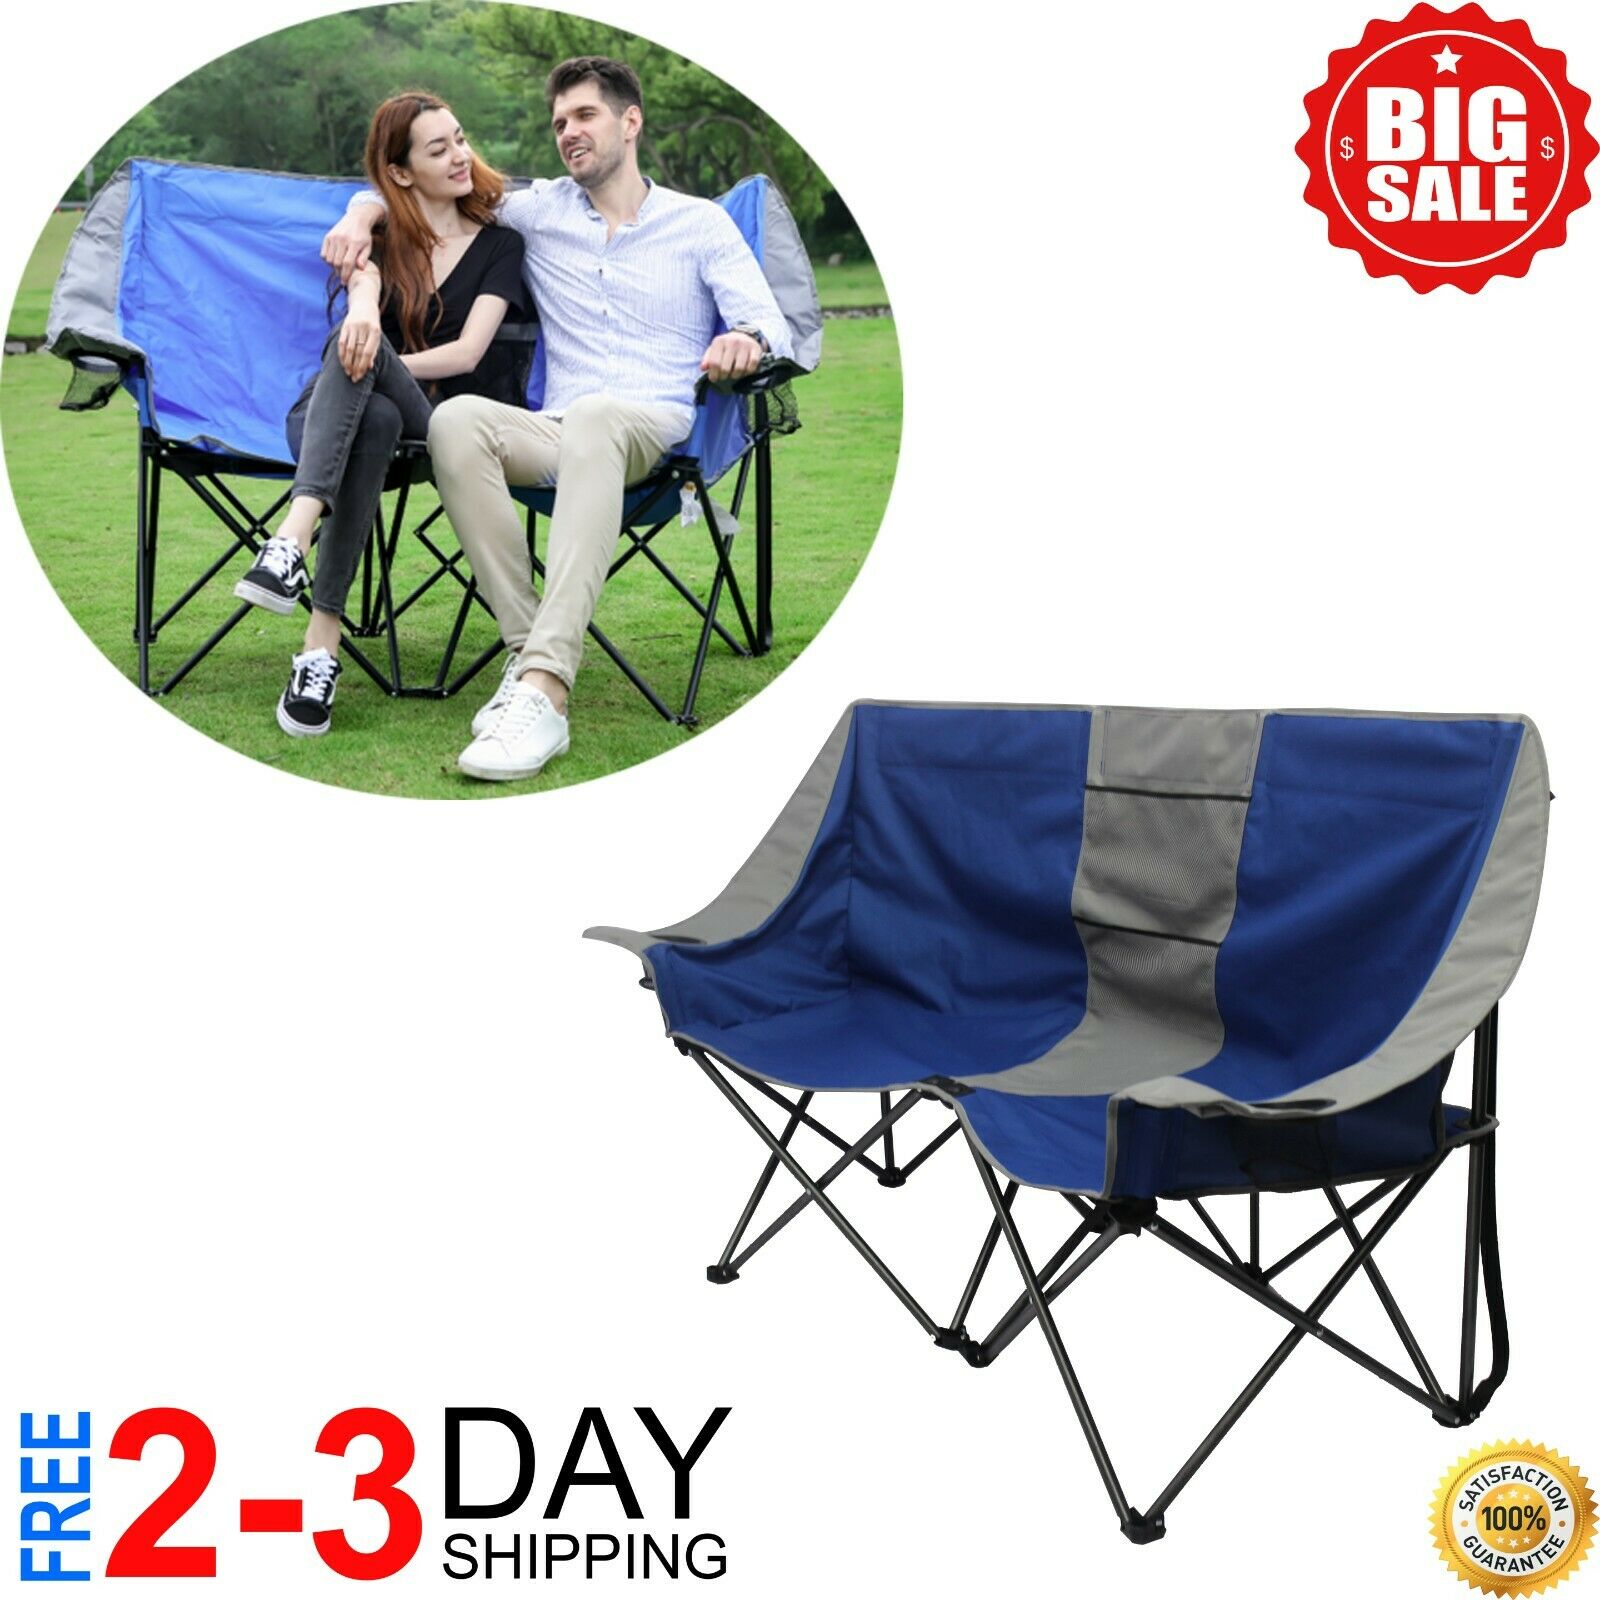 Two Person Conversation Steel Outdoor Camping Quad Chair, Love Seat NEW 2021